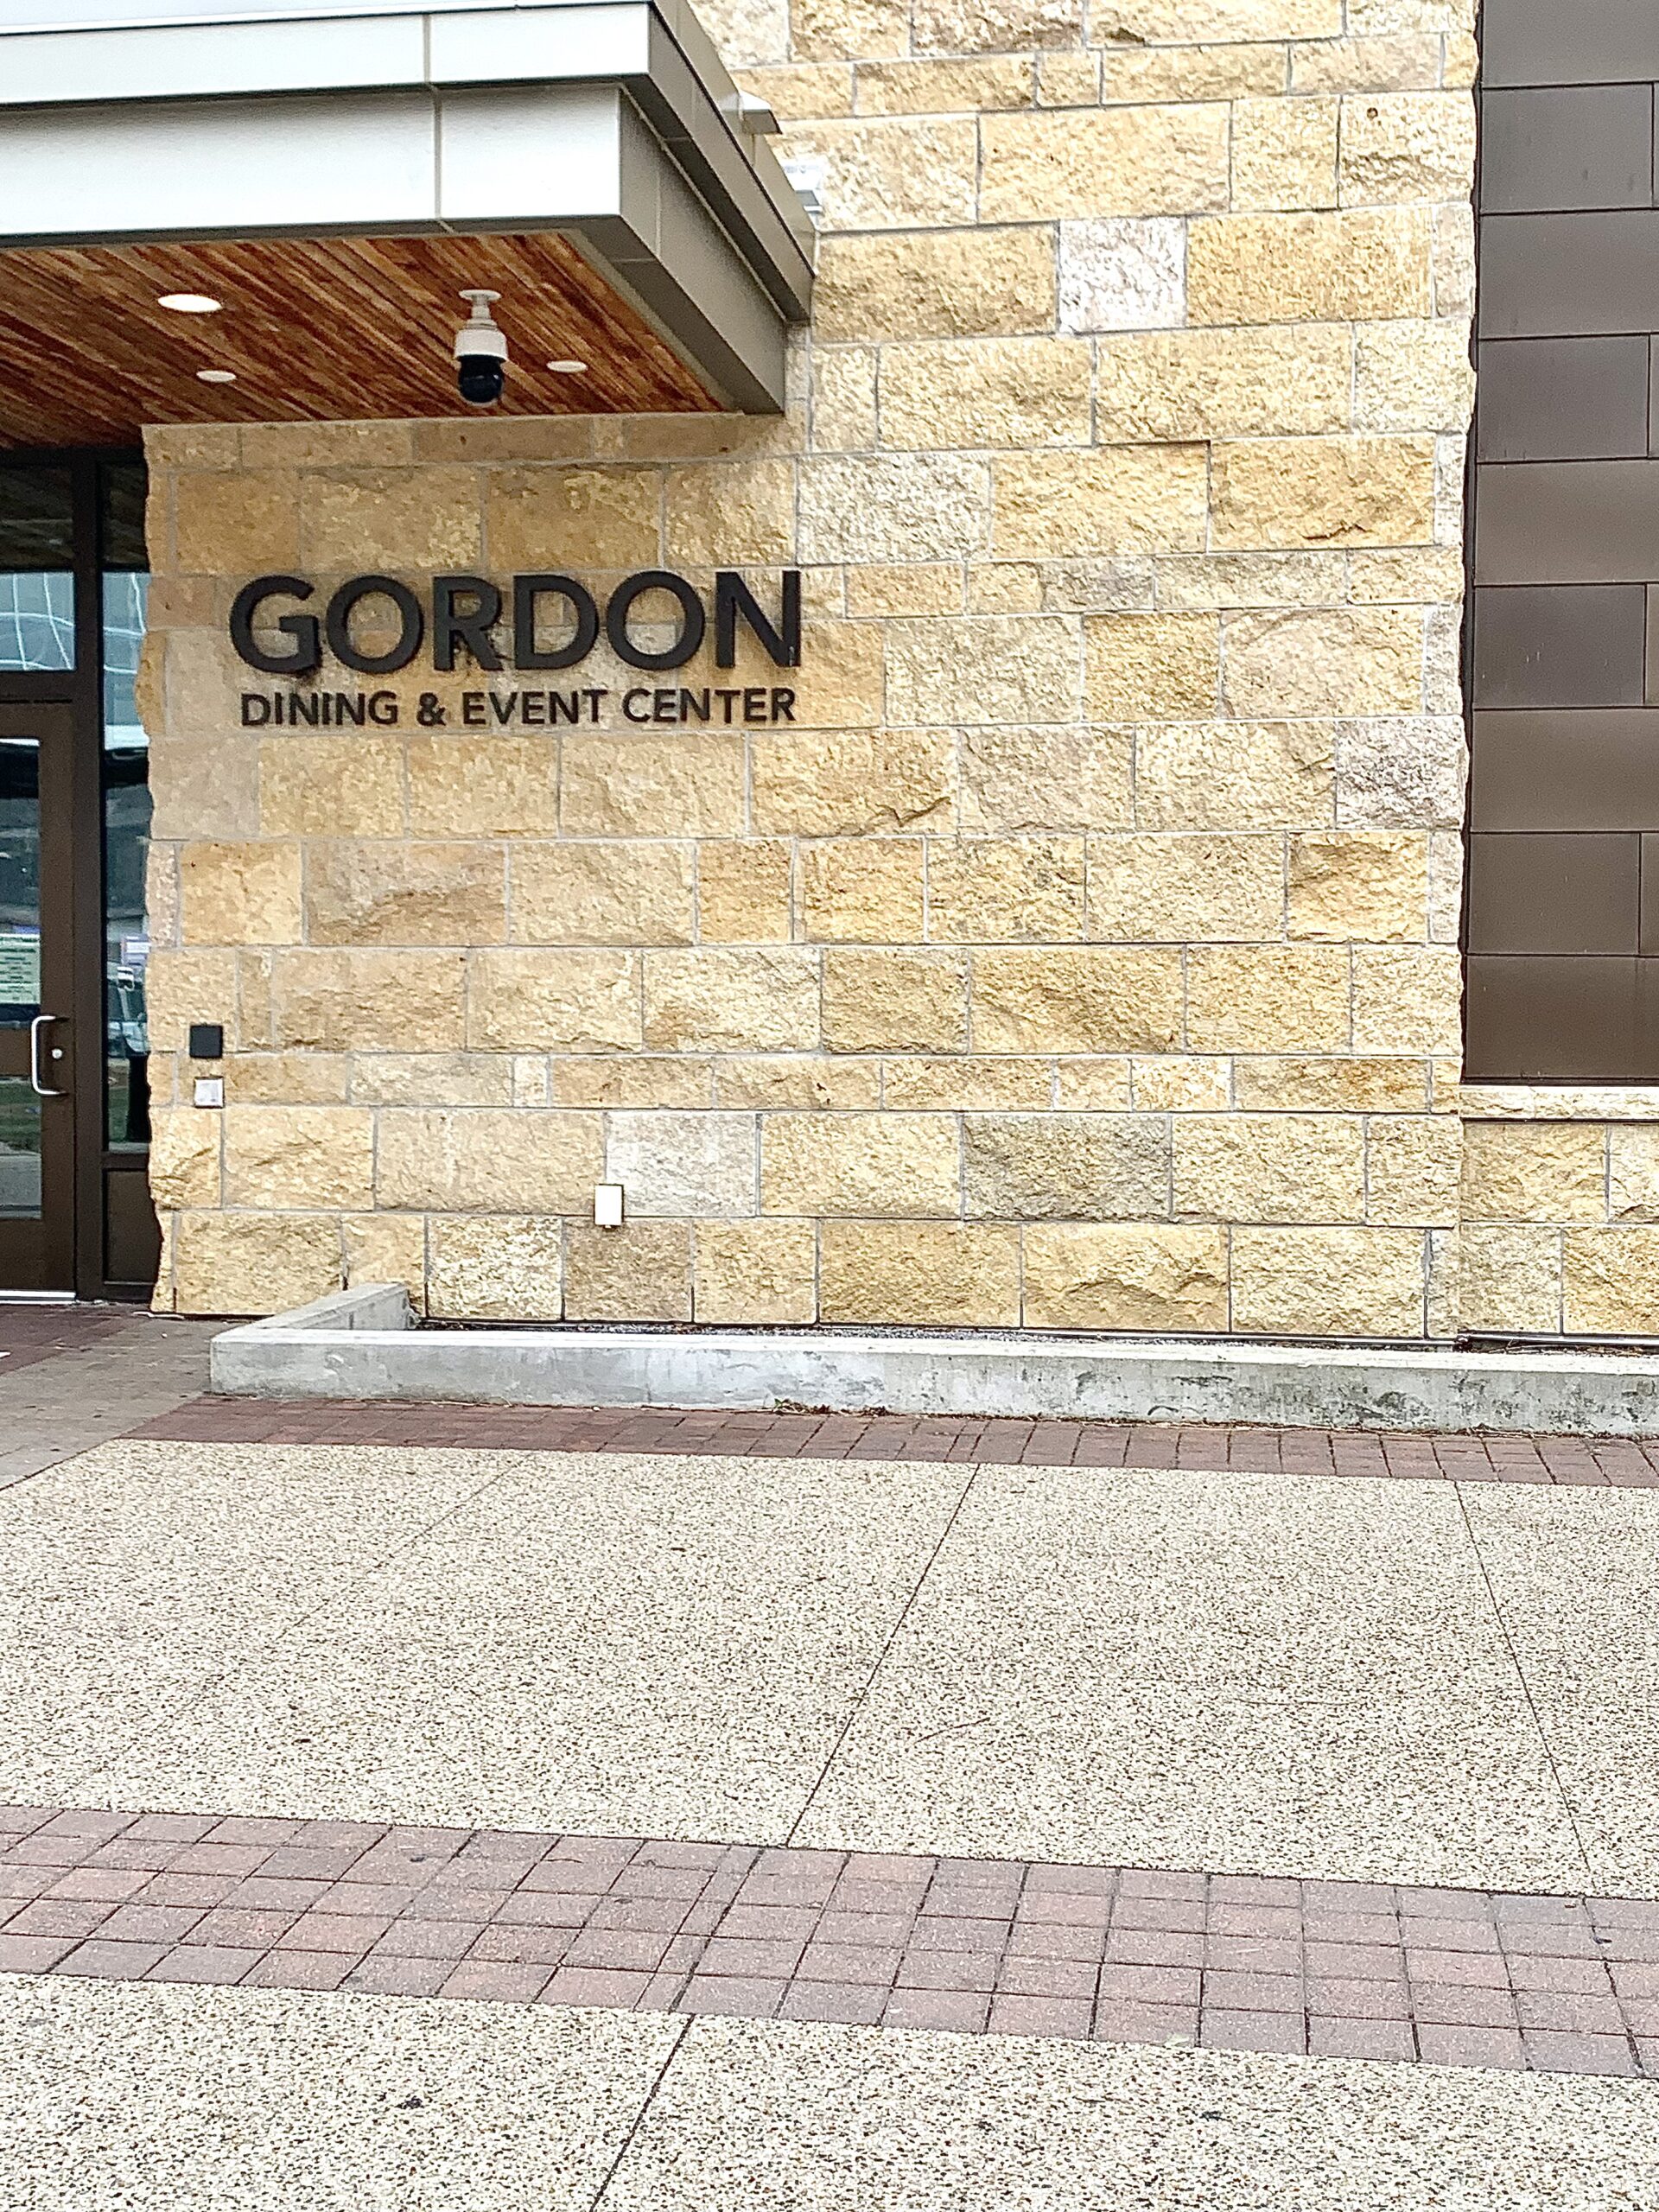 Gordon Dining & Event Center or Gordon Avenue Market. The picture is of Gordon's west entrance during a cloudy overcast day. Surrounding the perimeter of the marketplace is a concrete and brick walkway which leads to the black doors located on the west side of the building. The building is made of neutral-shaded bricks with wood and metal elements.